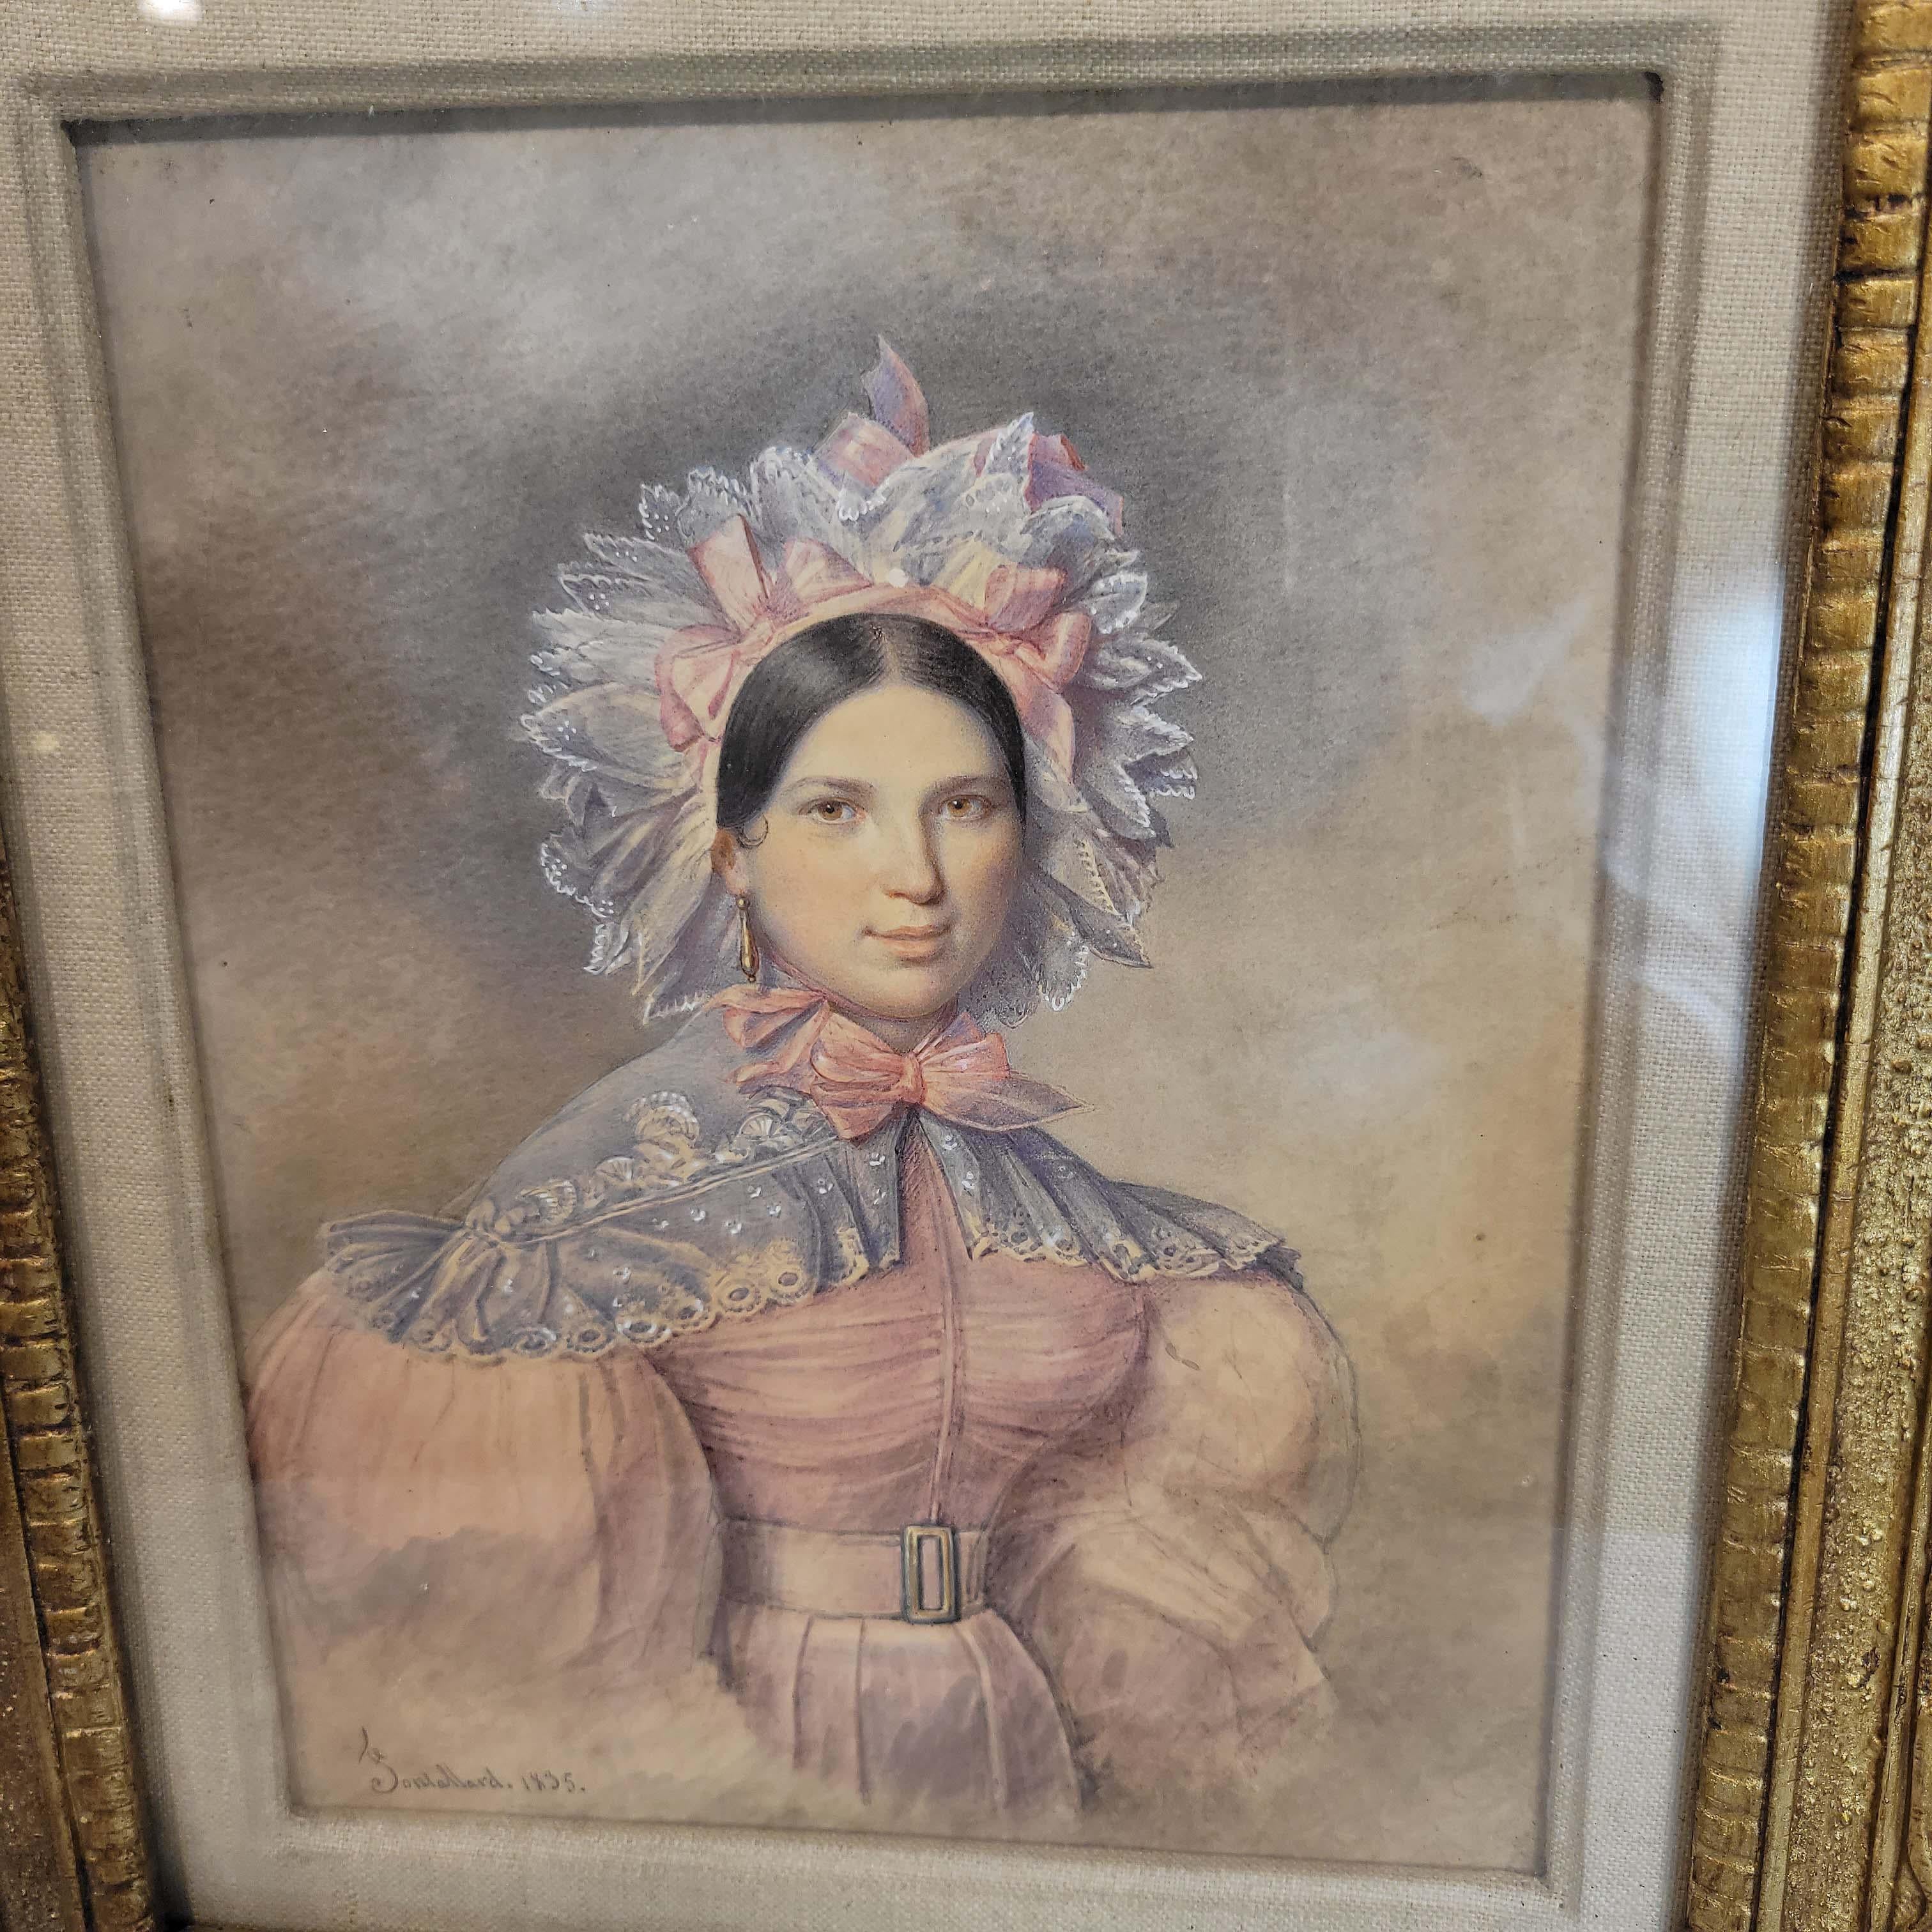 Watercolor and gouache on paper signed and dated 1835. Depicting a young beauty in a pink sild dress with light blue lace collar tied with a pink sheer bow around her neck and sililar color head dress. She is wearing gold earring. Mounted in gilt